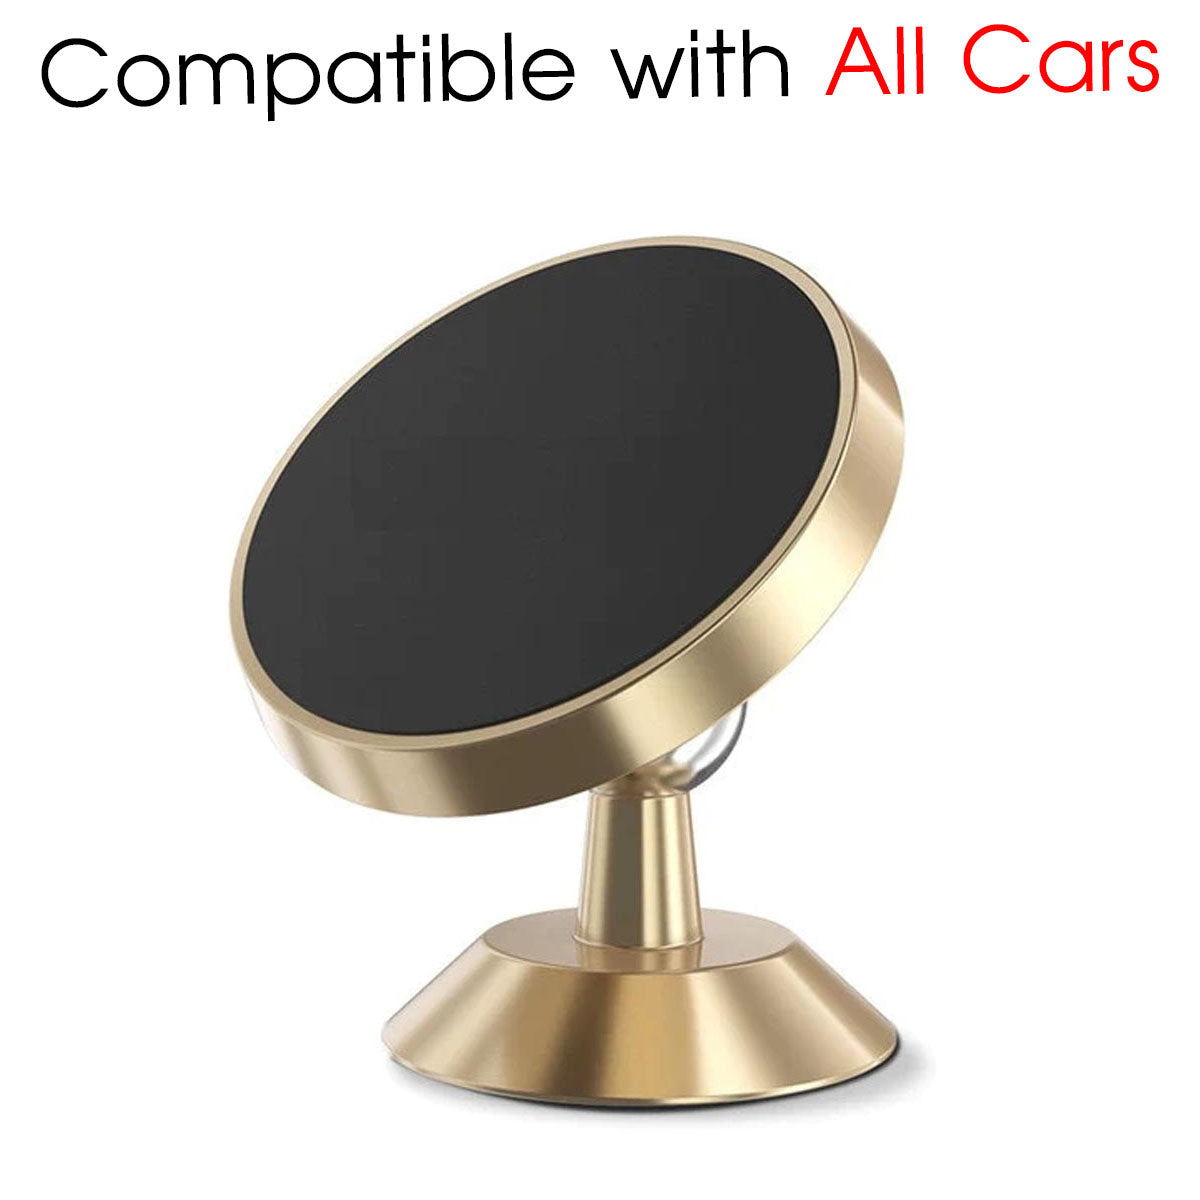 [2 Pack ] Magnetic Phone Mount, Custom For Cars, [ Super Strong Magnet ] [ with 4 Metal Plate ] car Magnetic Phone Holder, [ 360° Rotation ] Universal Dashboard car Mount Fits All Cell Phones, Car Accessories TY13982 - Delicate Leather